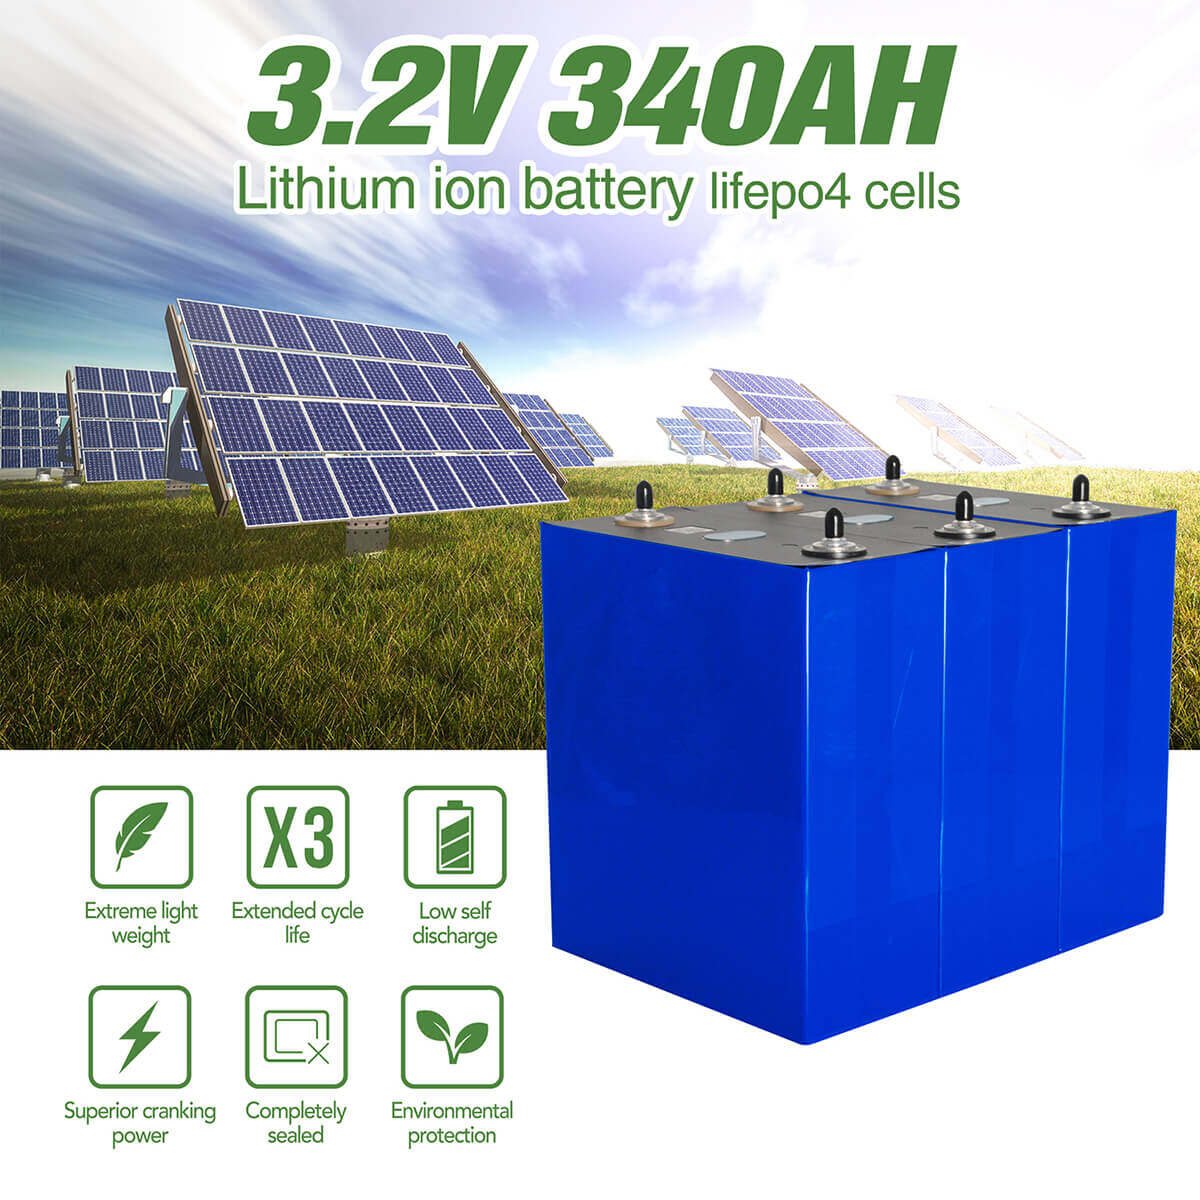 340ah lifepo4 battery cell voltage